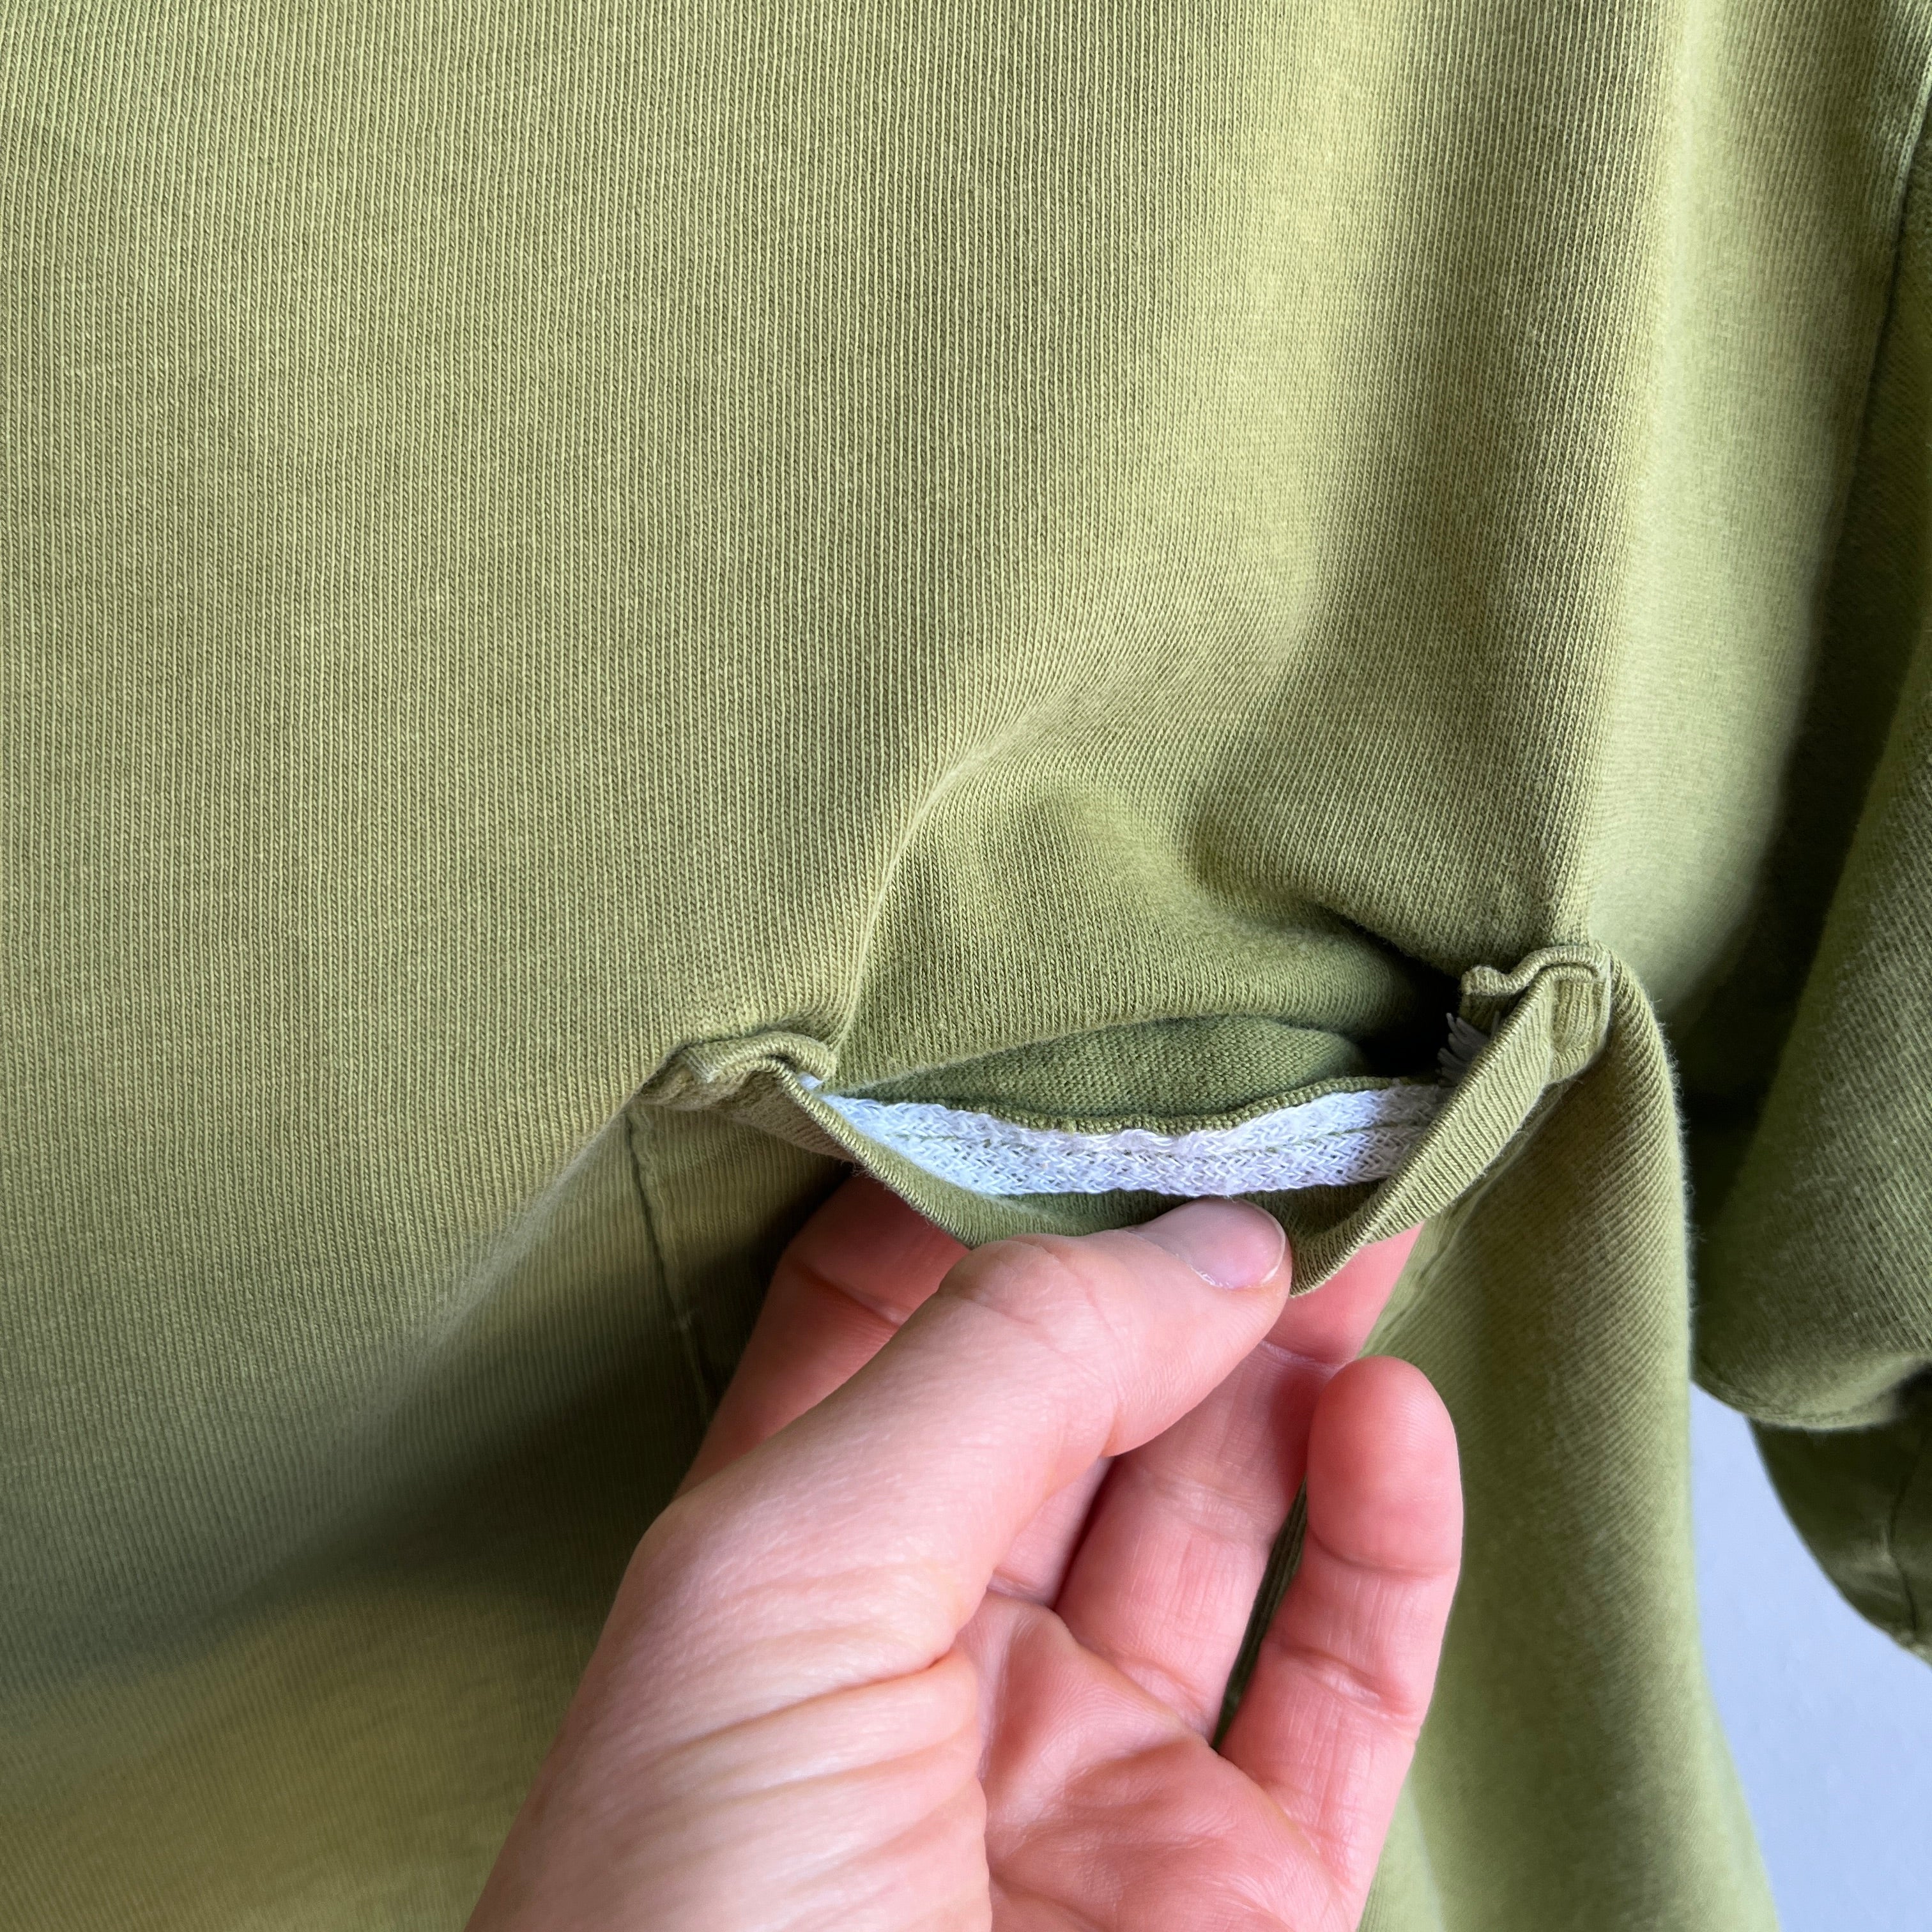 1980s Blank Soft and Worn Olive Green Pocket T-Shirt